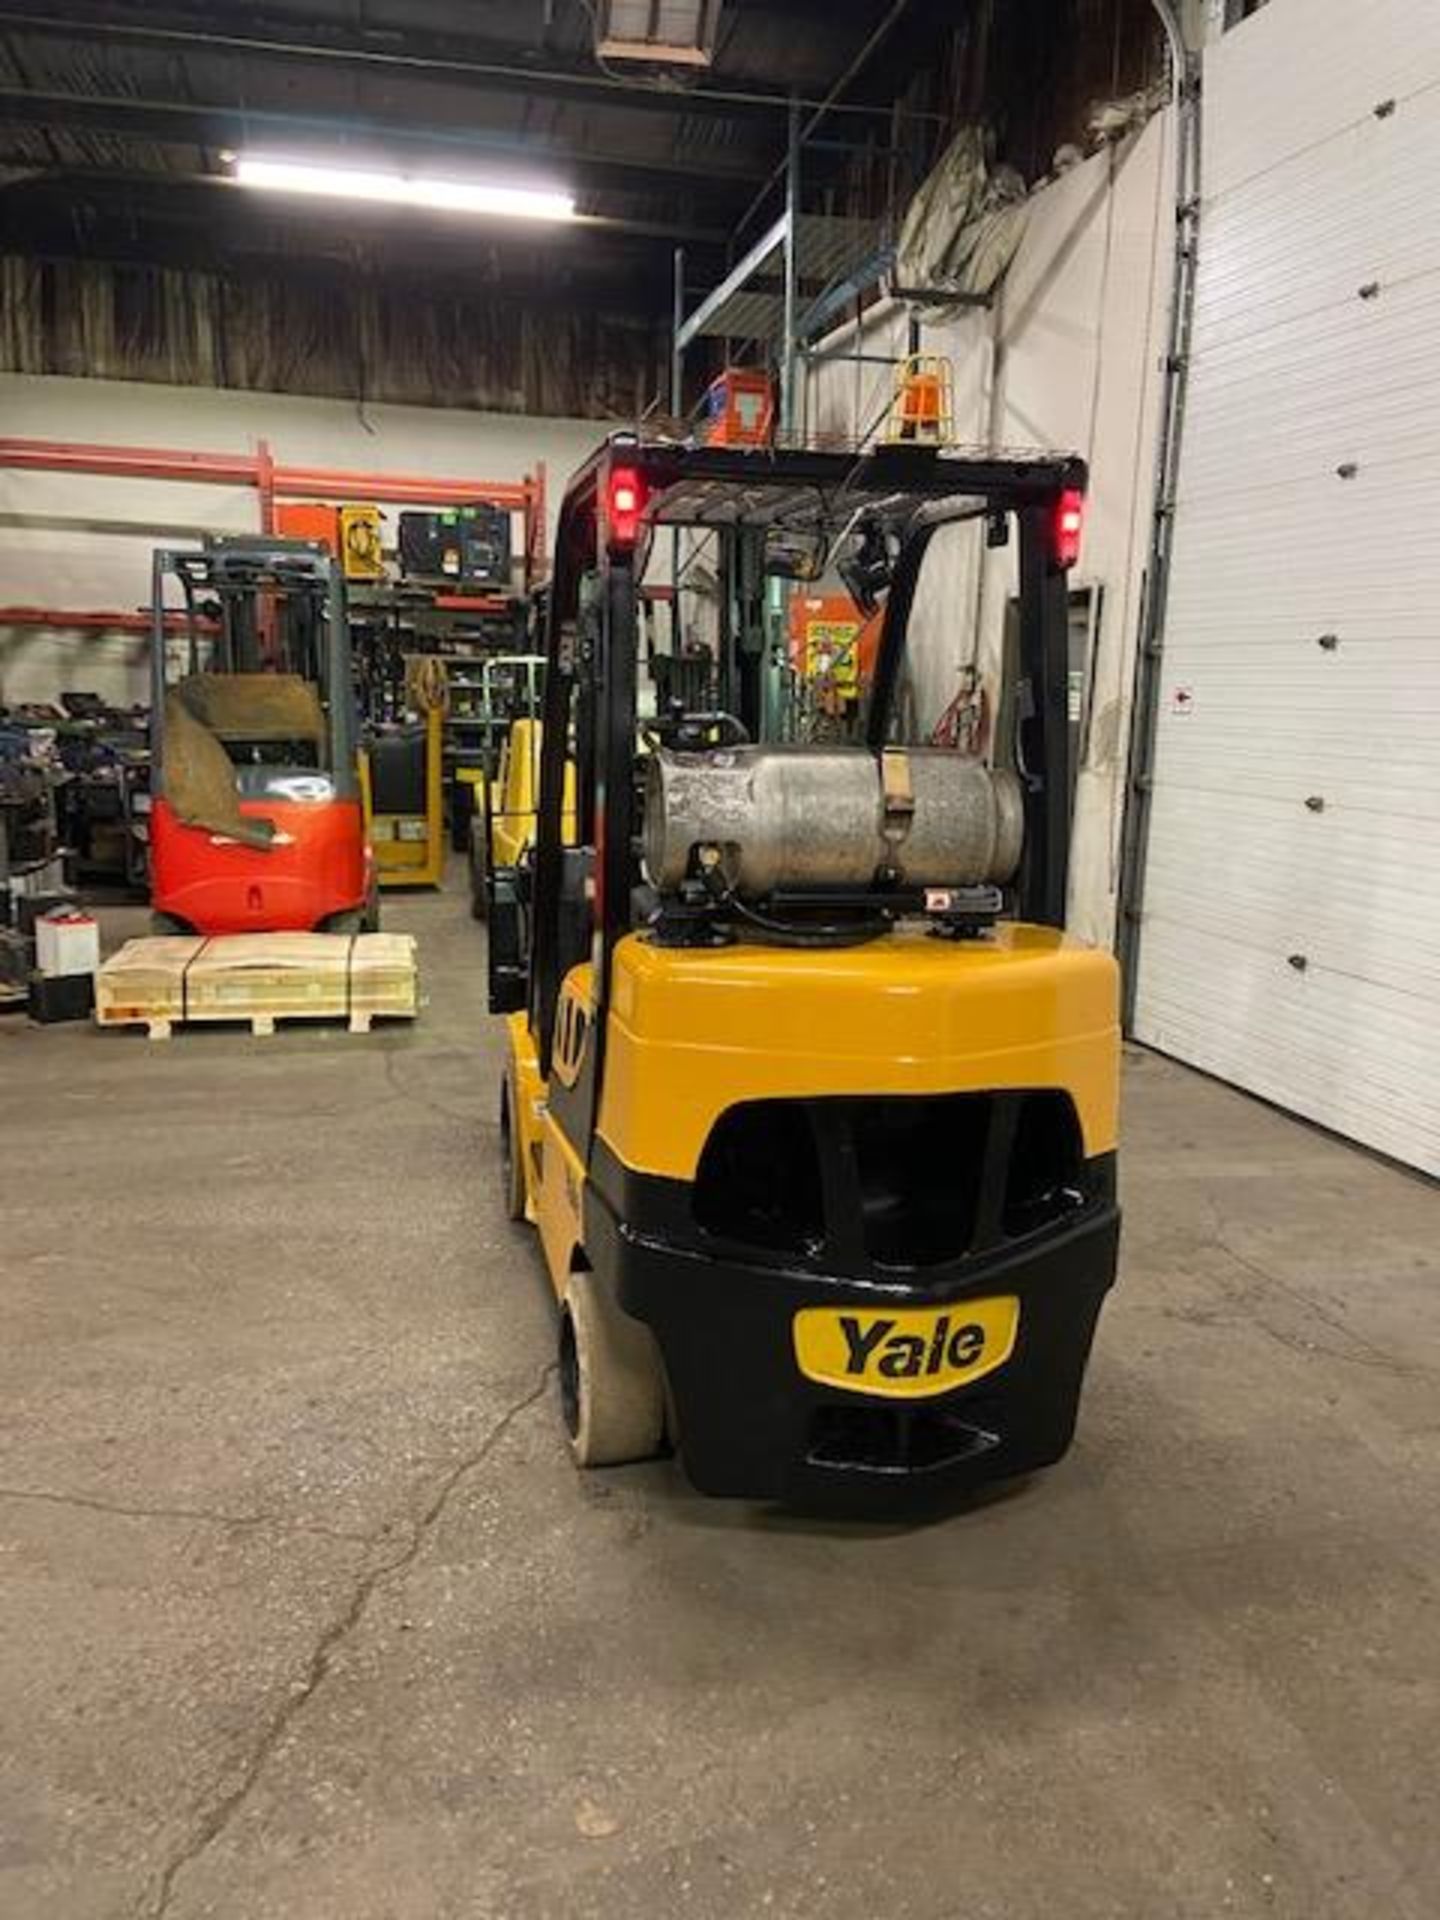 FREE CUSTOMS - 2016 Yale 7000lbs Capacity Forklift LPG (propane) with 3-STAGE MAST with - Image 3 of 3